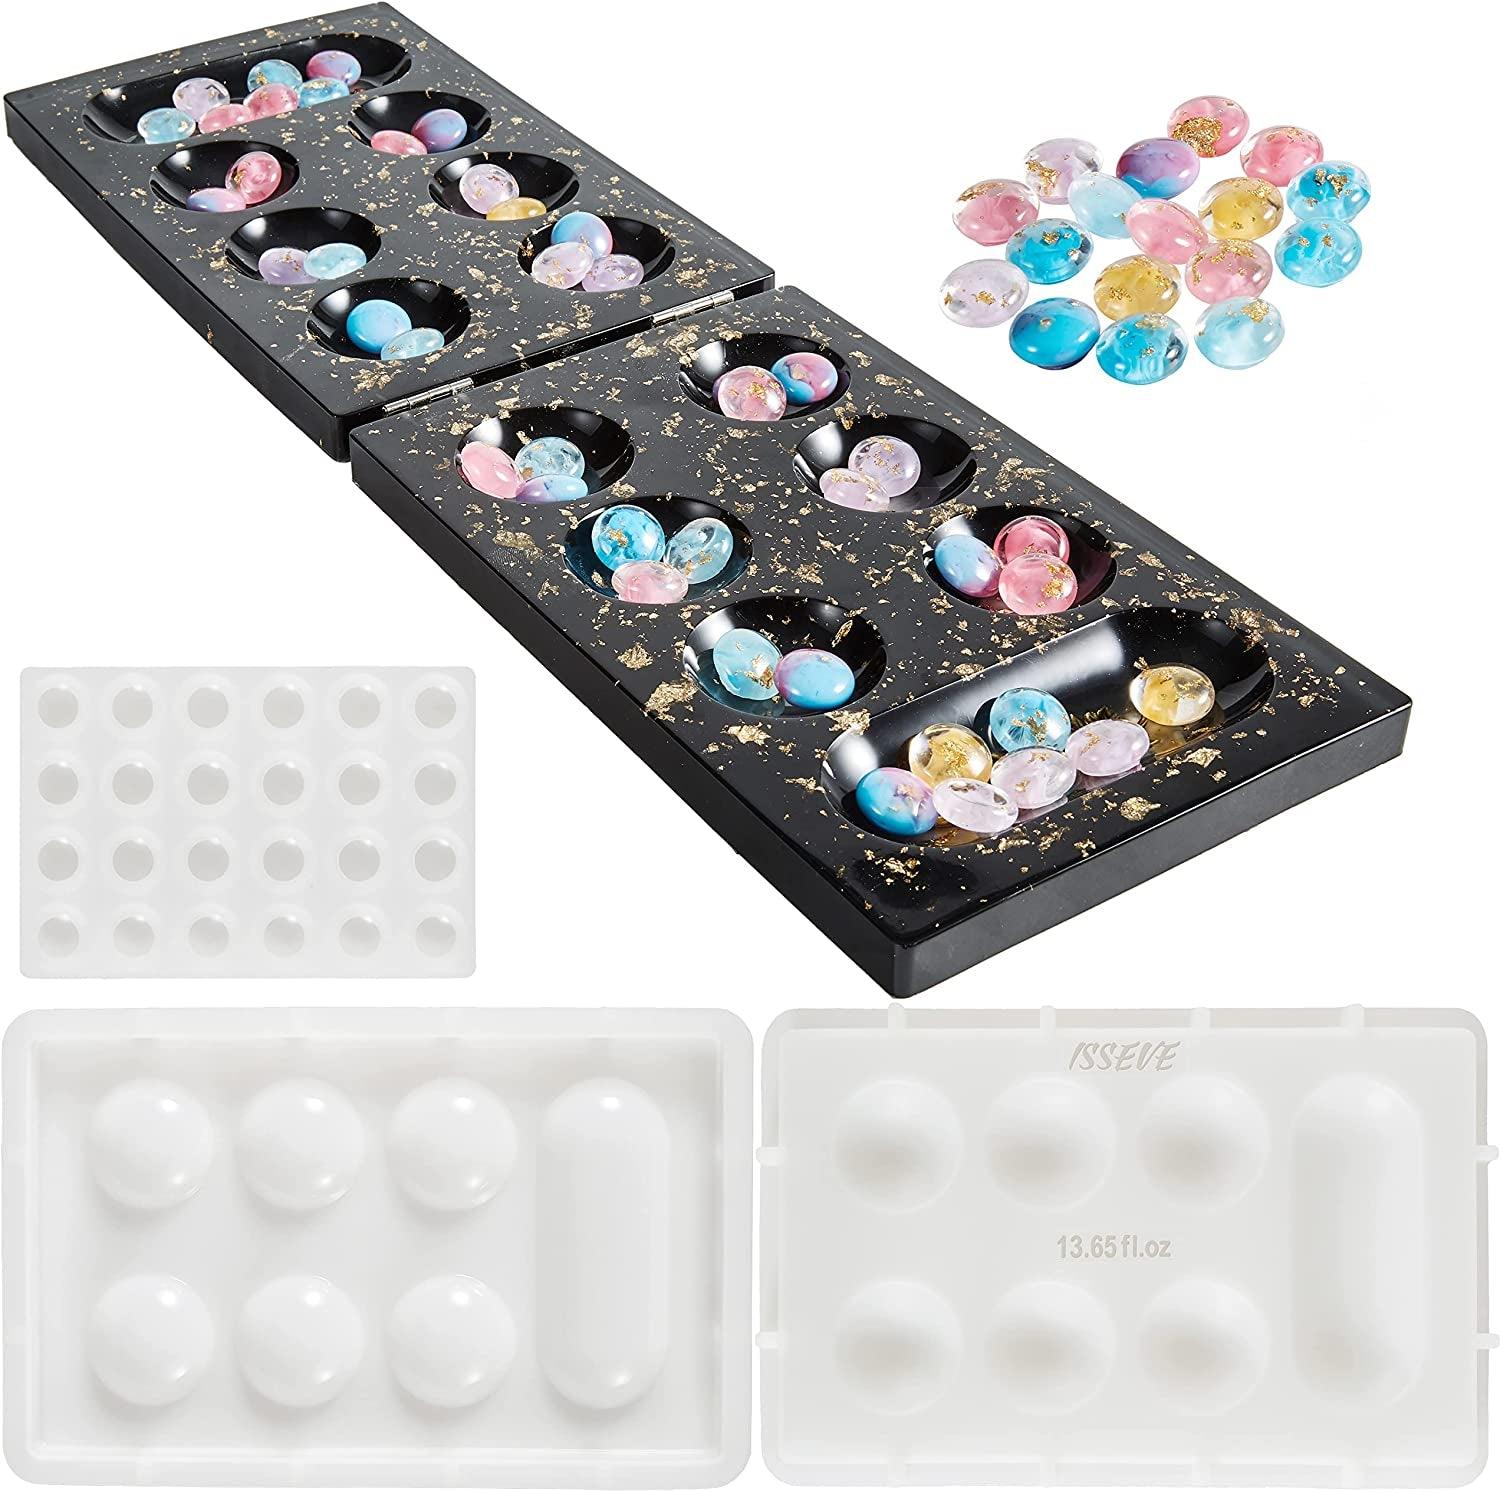 ISSEVE 3Pcs Large Resin Molds Silicone Kit, Silicone Molds for Resin,  Including Heart Resin Mold Round Hexagon Mold, Epoxy Resin Casting Molds  for